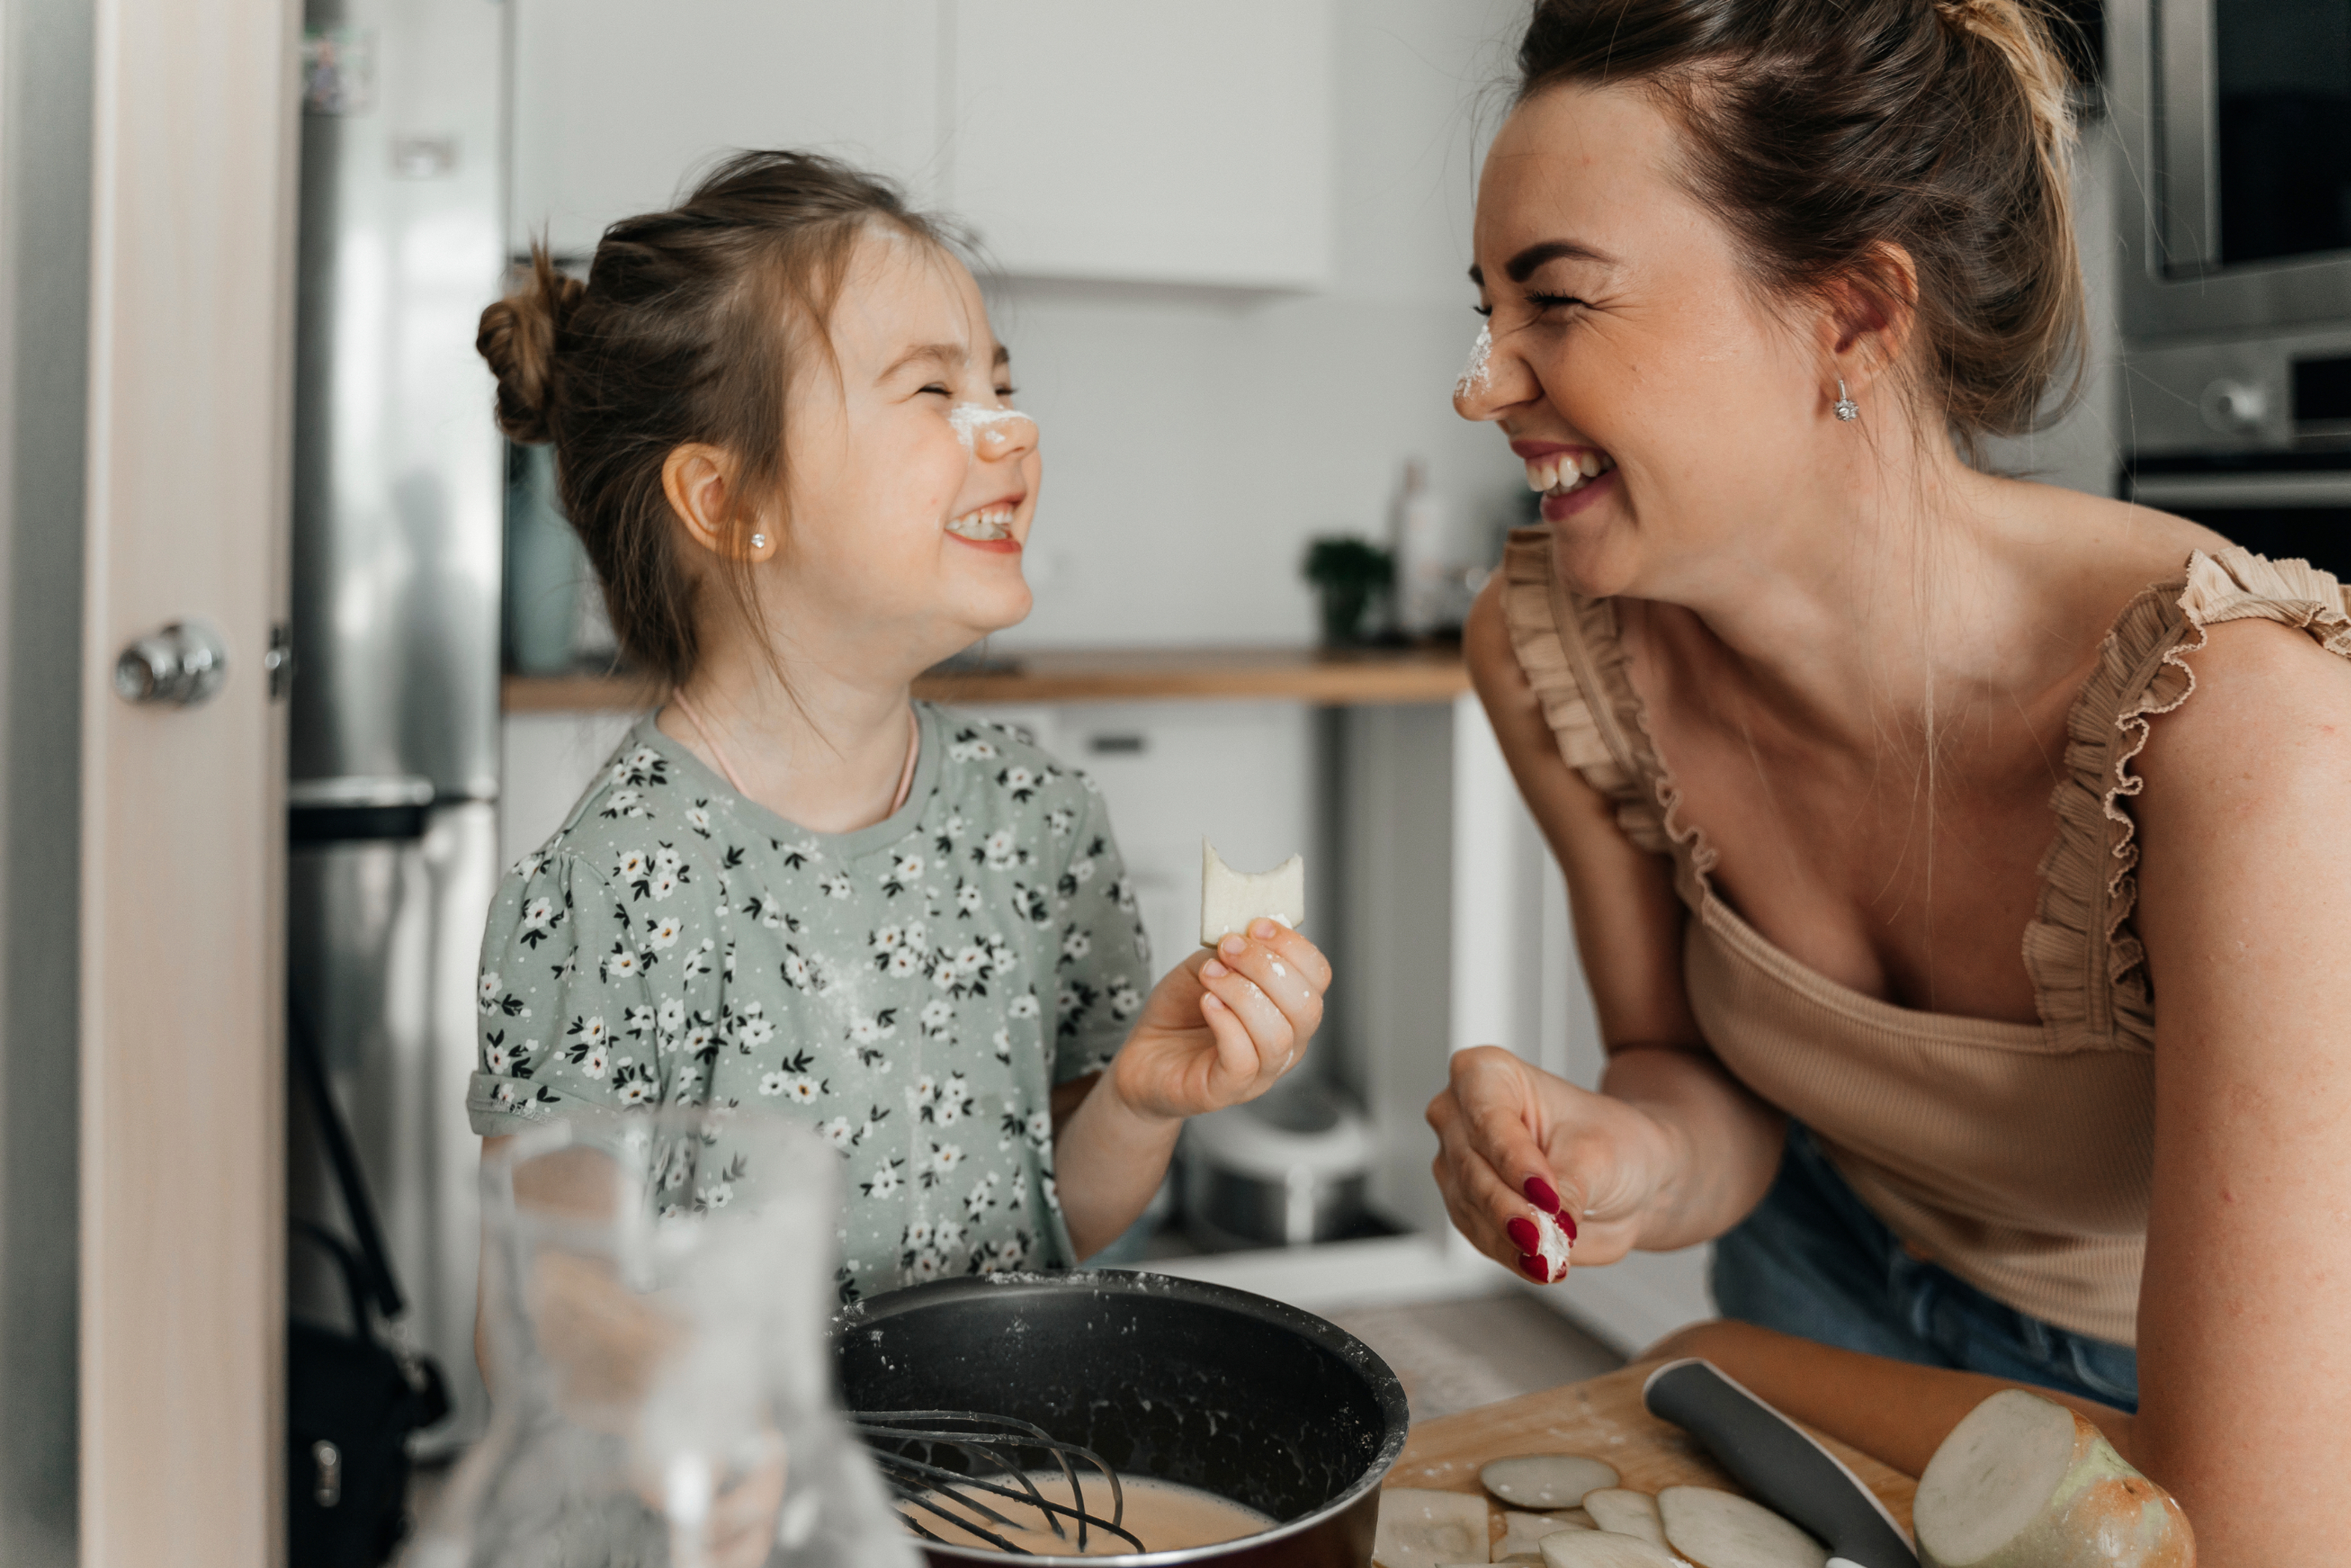 A woman bakes with her daughter; they both have flour on their noses